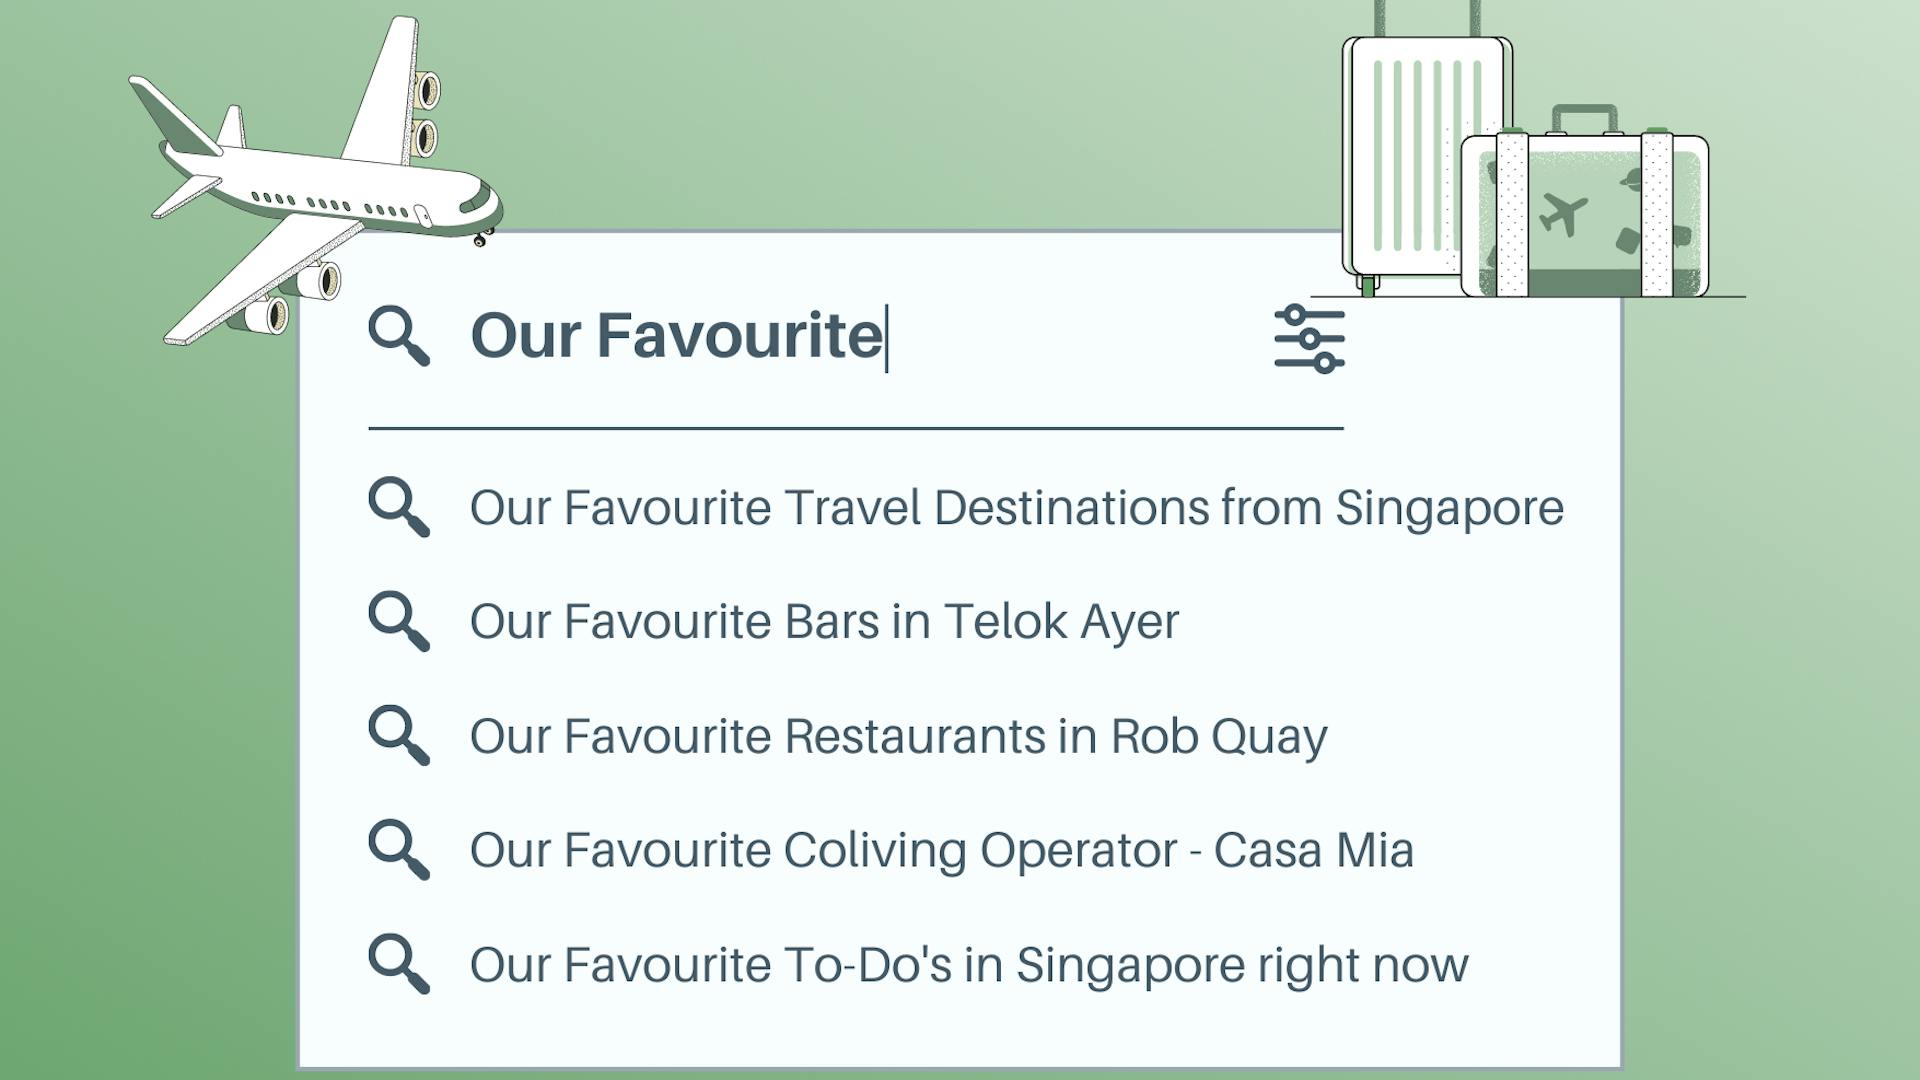 Our Favourite Travel Destinations from Singapore, plane graphic, suitcase graphic